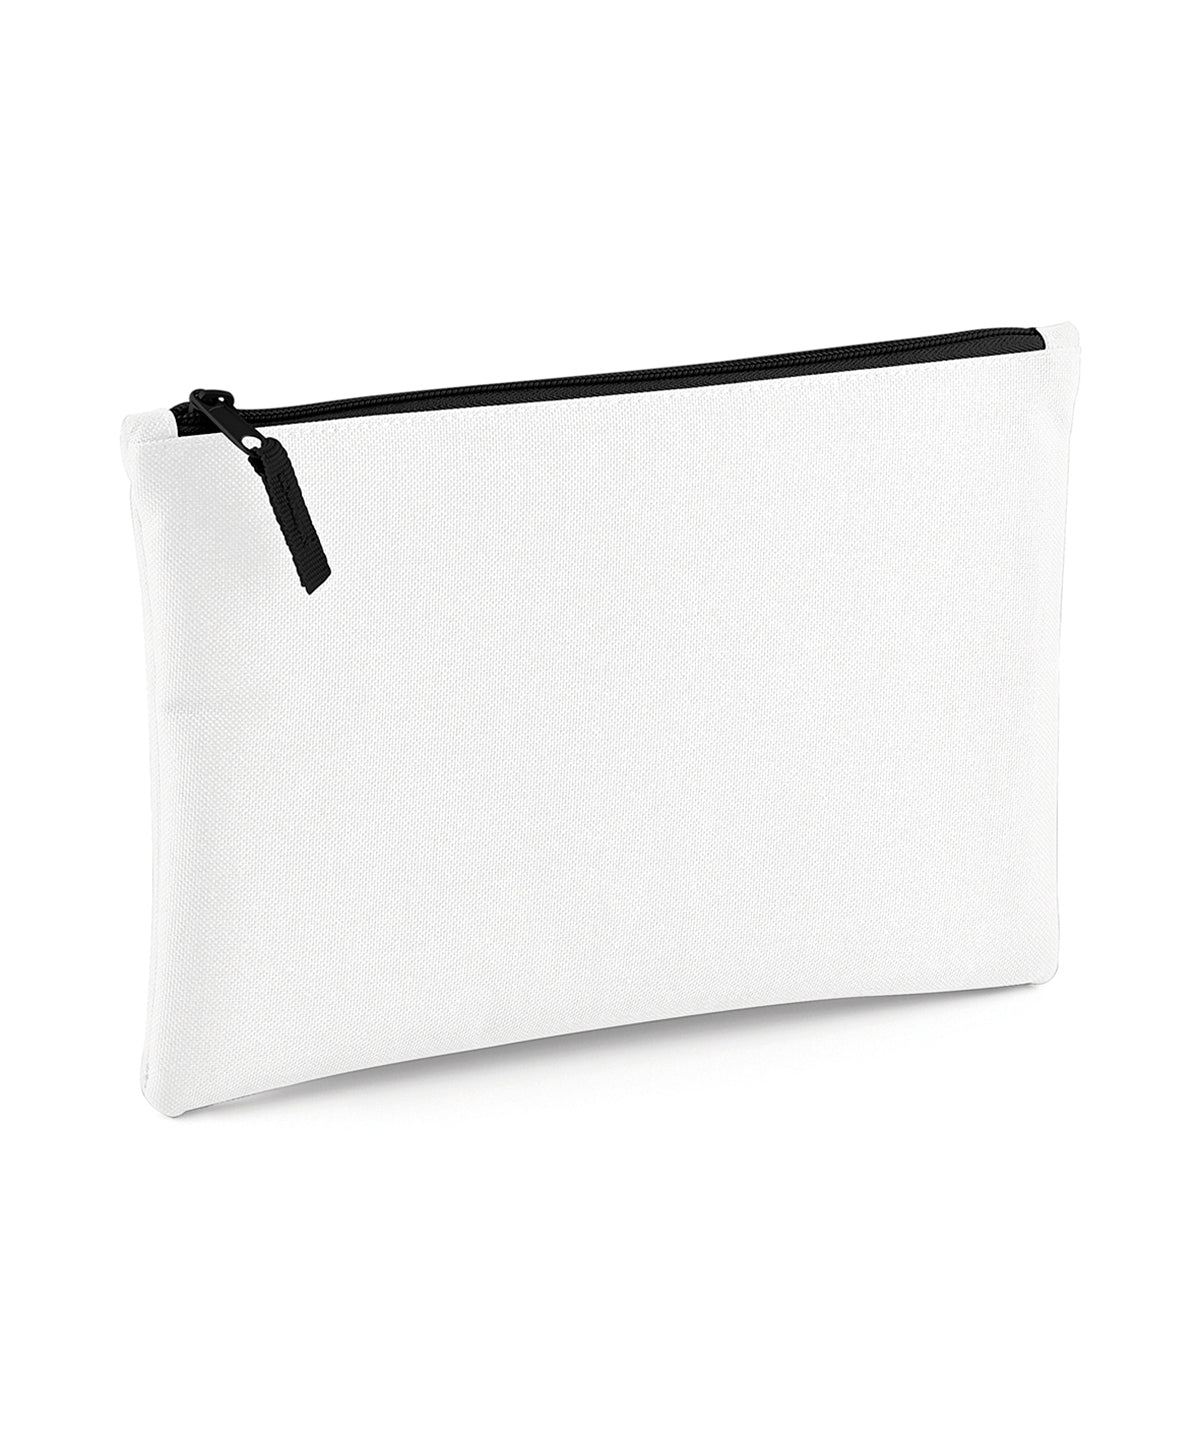 Personalised Bags - White Bagbase Grab pouch